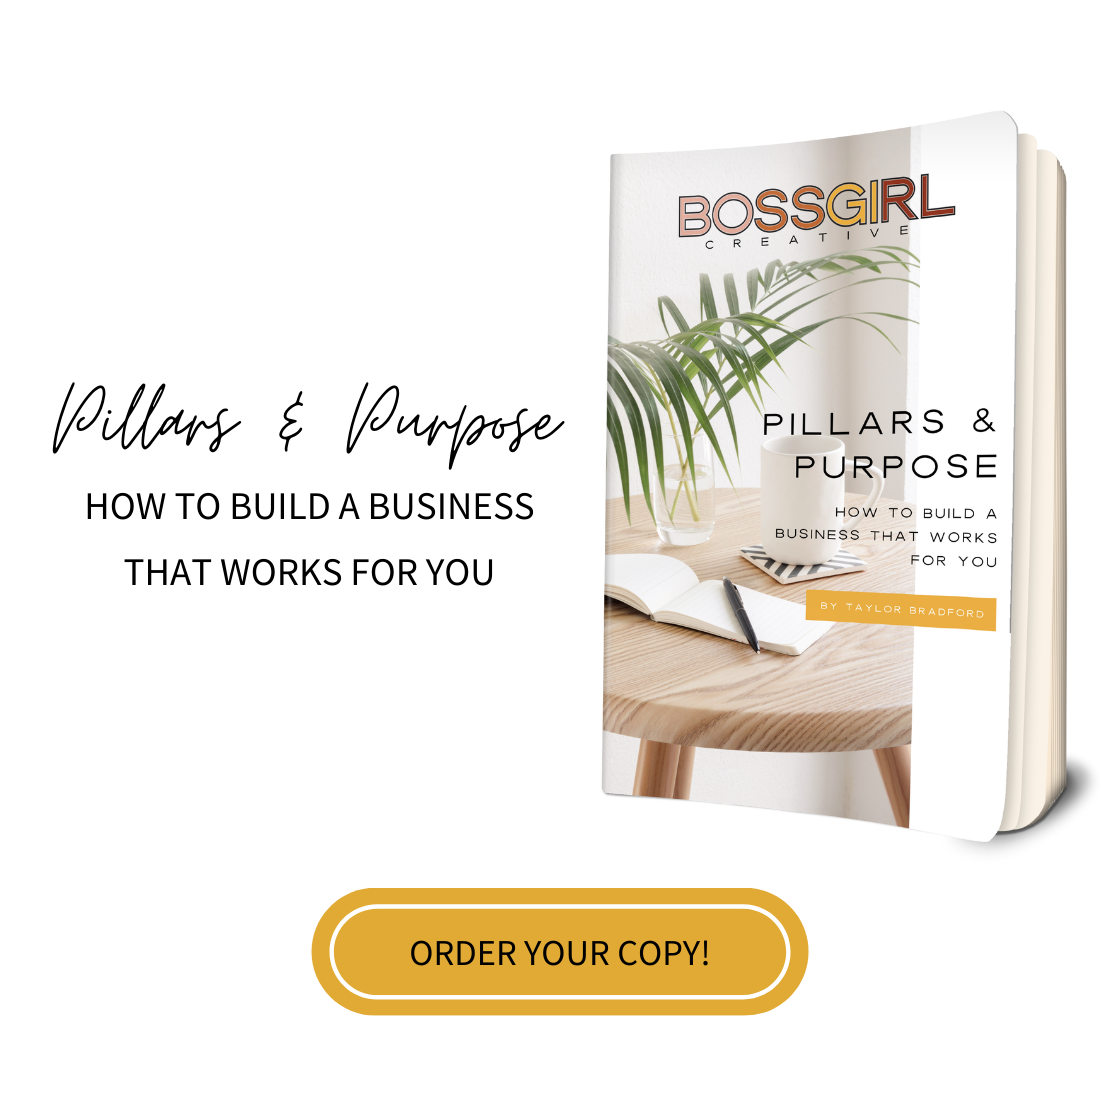 Pillars & Purpose: How to Build a Business That Works for You